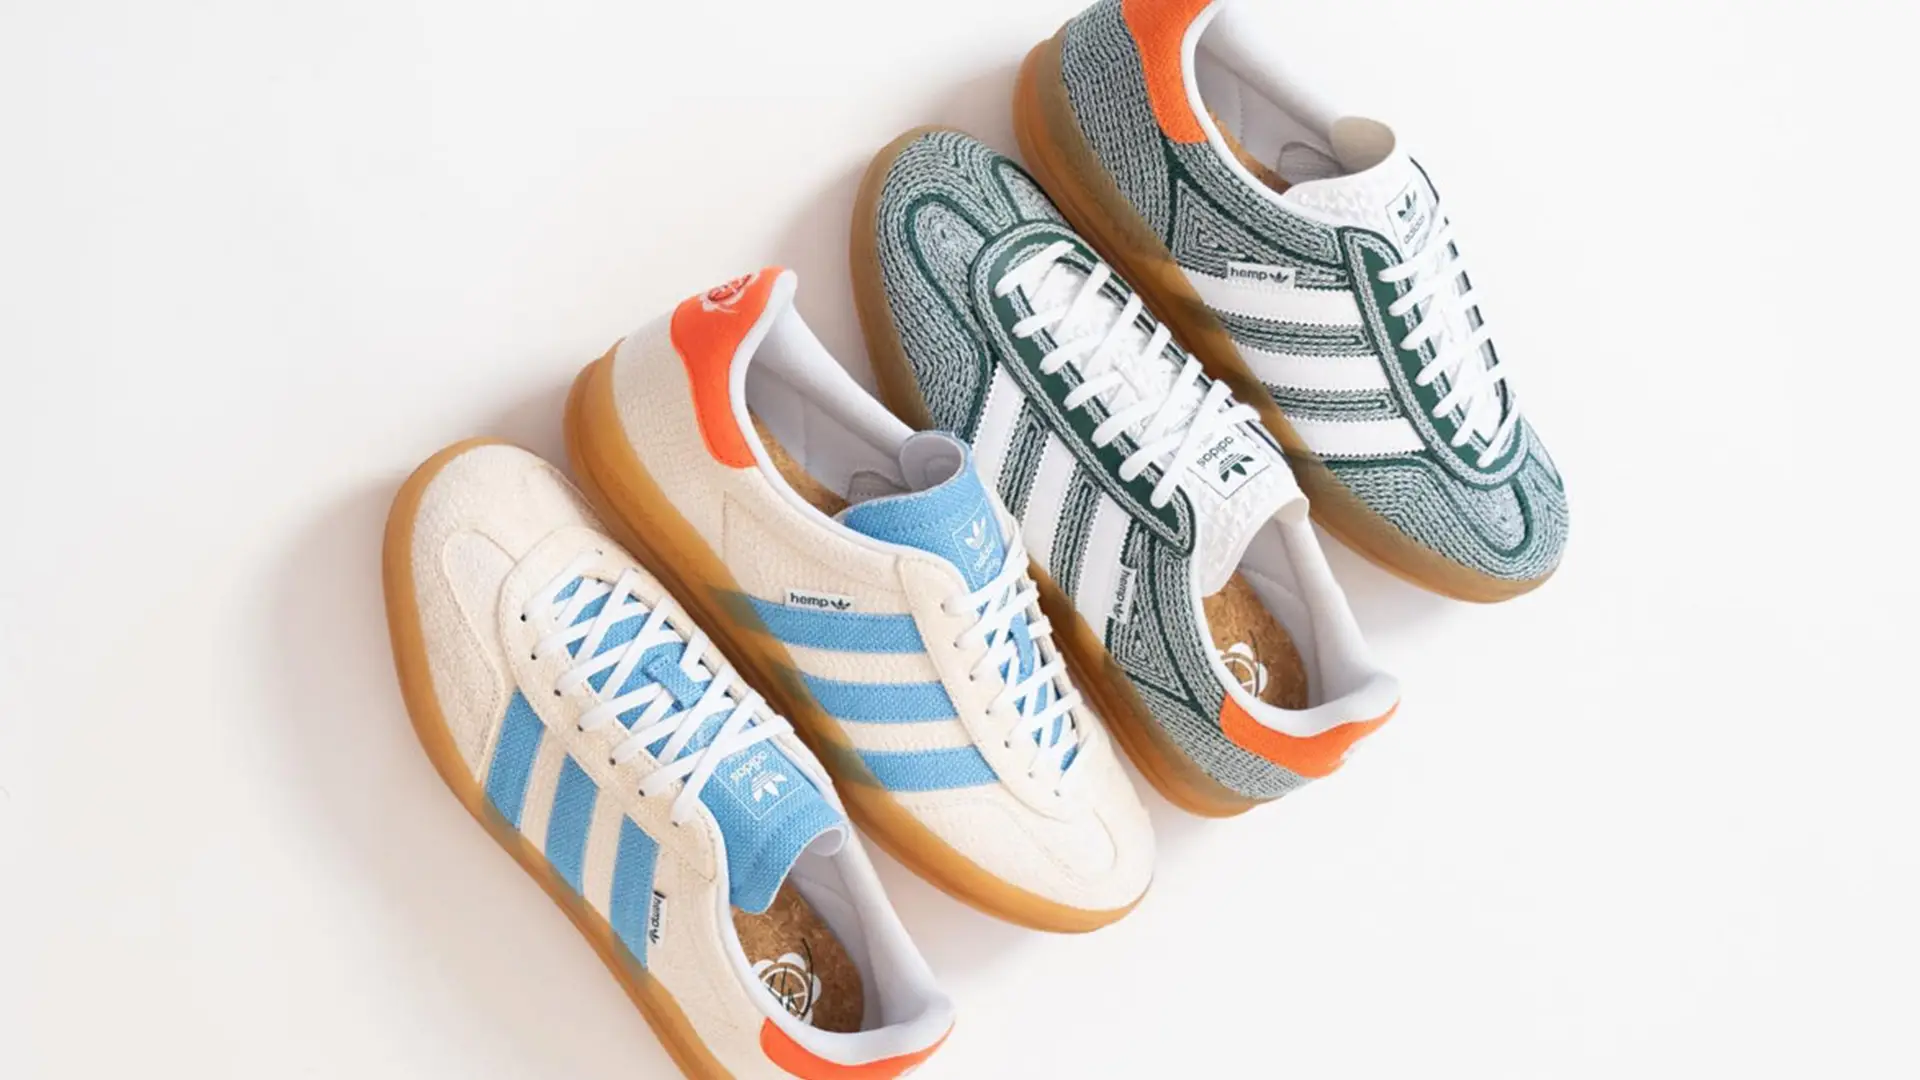 adidas and Sean Wotherspoon Are Serving Up Super-Clean Hemp Gazelles